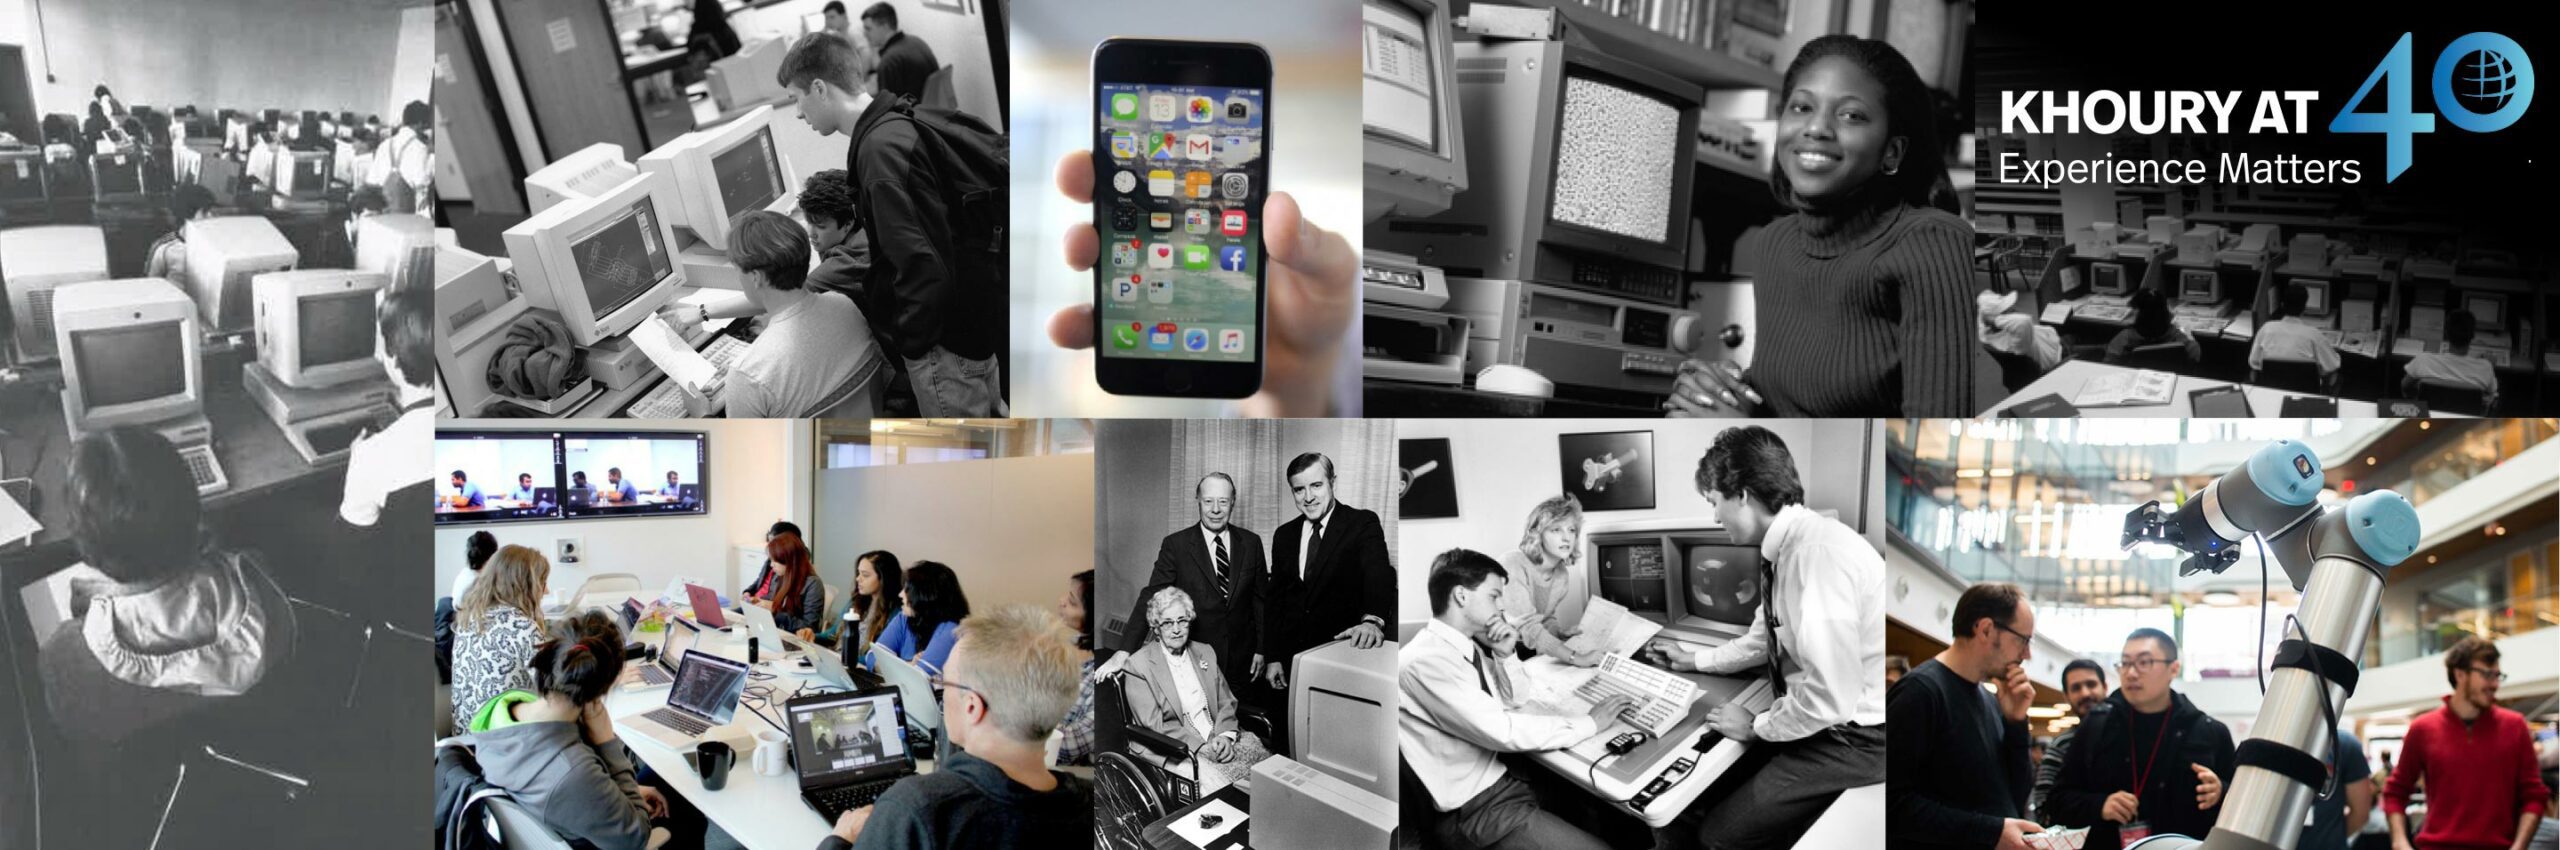 A photo montage of important people and new technologies from the history of Khoury College, including a mobile phone, a woman sitting near a computer during the 1990s, a photo of David and Margaret Fitzgerald Cullinane, a group of students sitting by computers from the 1980s, and faculty and students looking at a robot during the 2010s